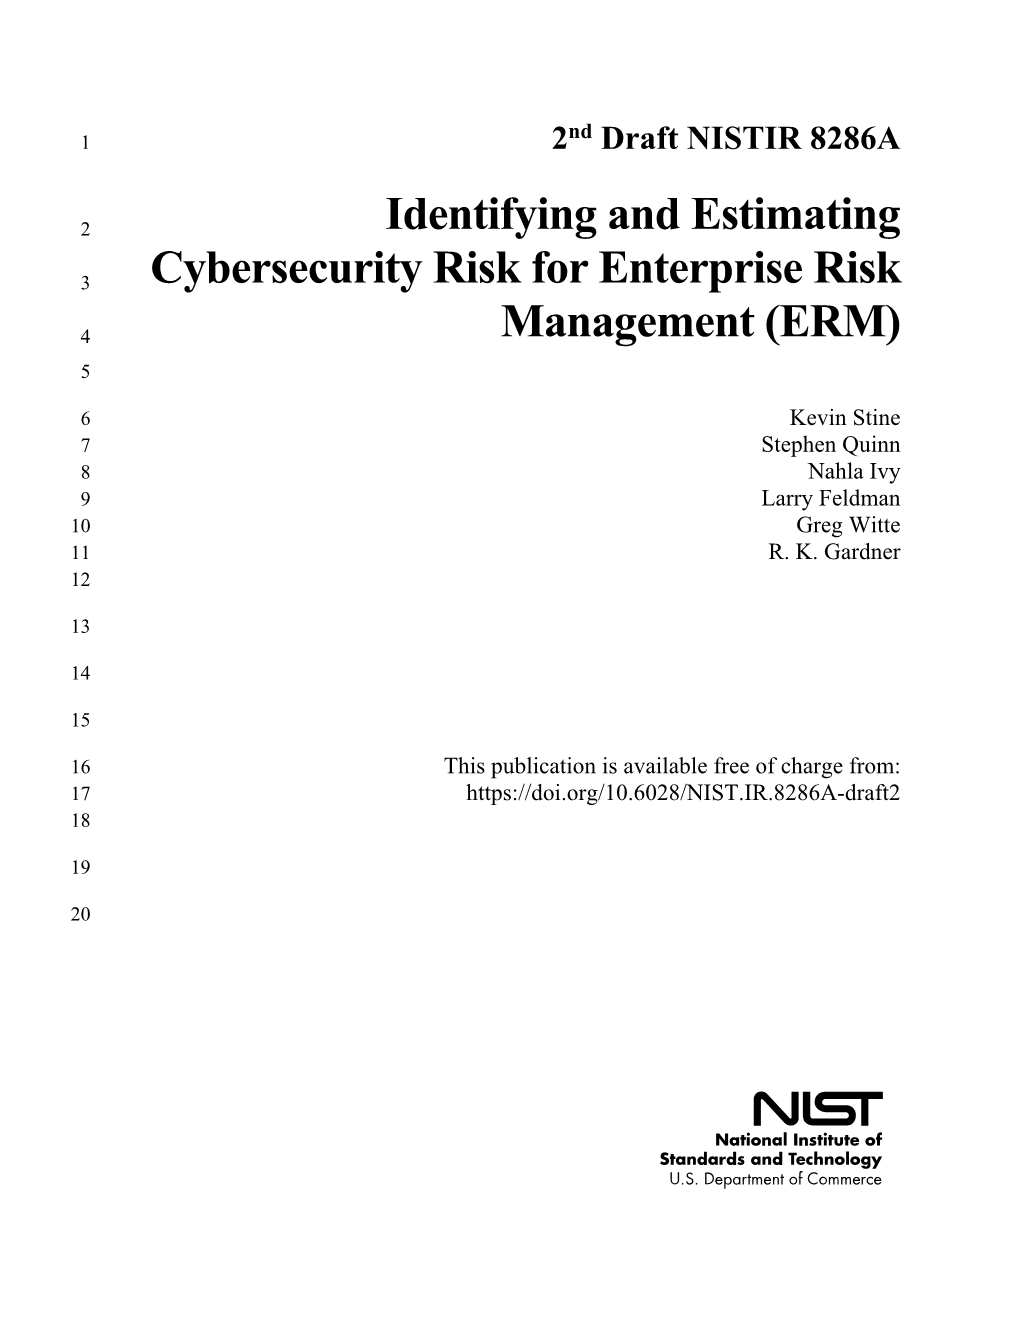 2Nd Draft NISTIR 8286A Identifying and Estimating Cybersecurity Risk